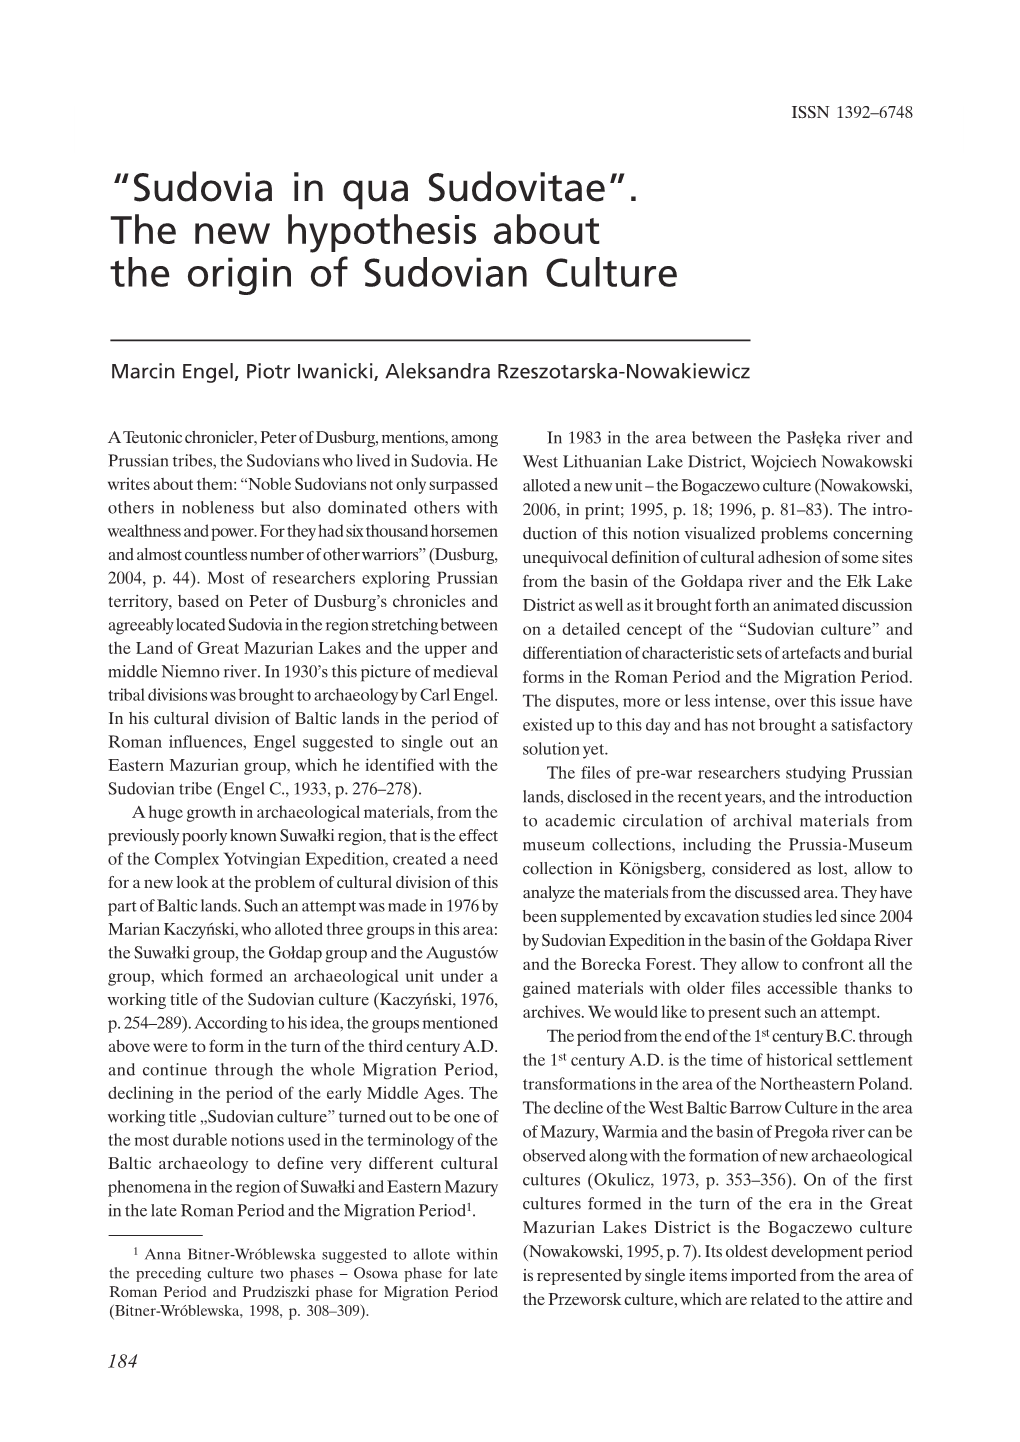 The New Hypothesis About the Origin of Sudovian Culture